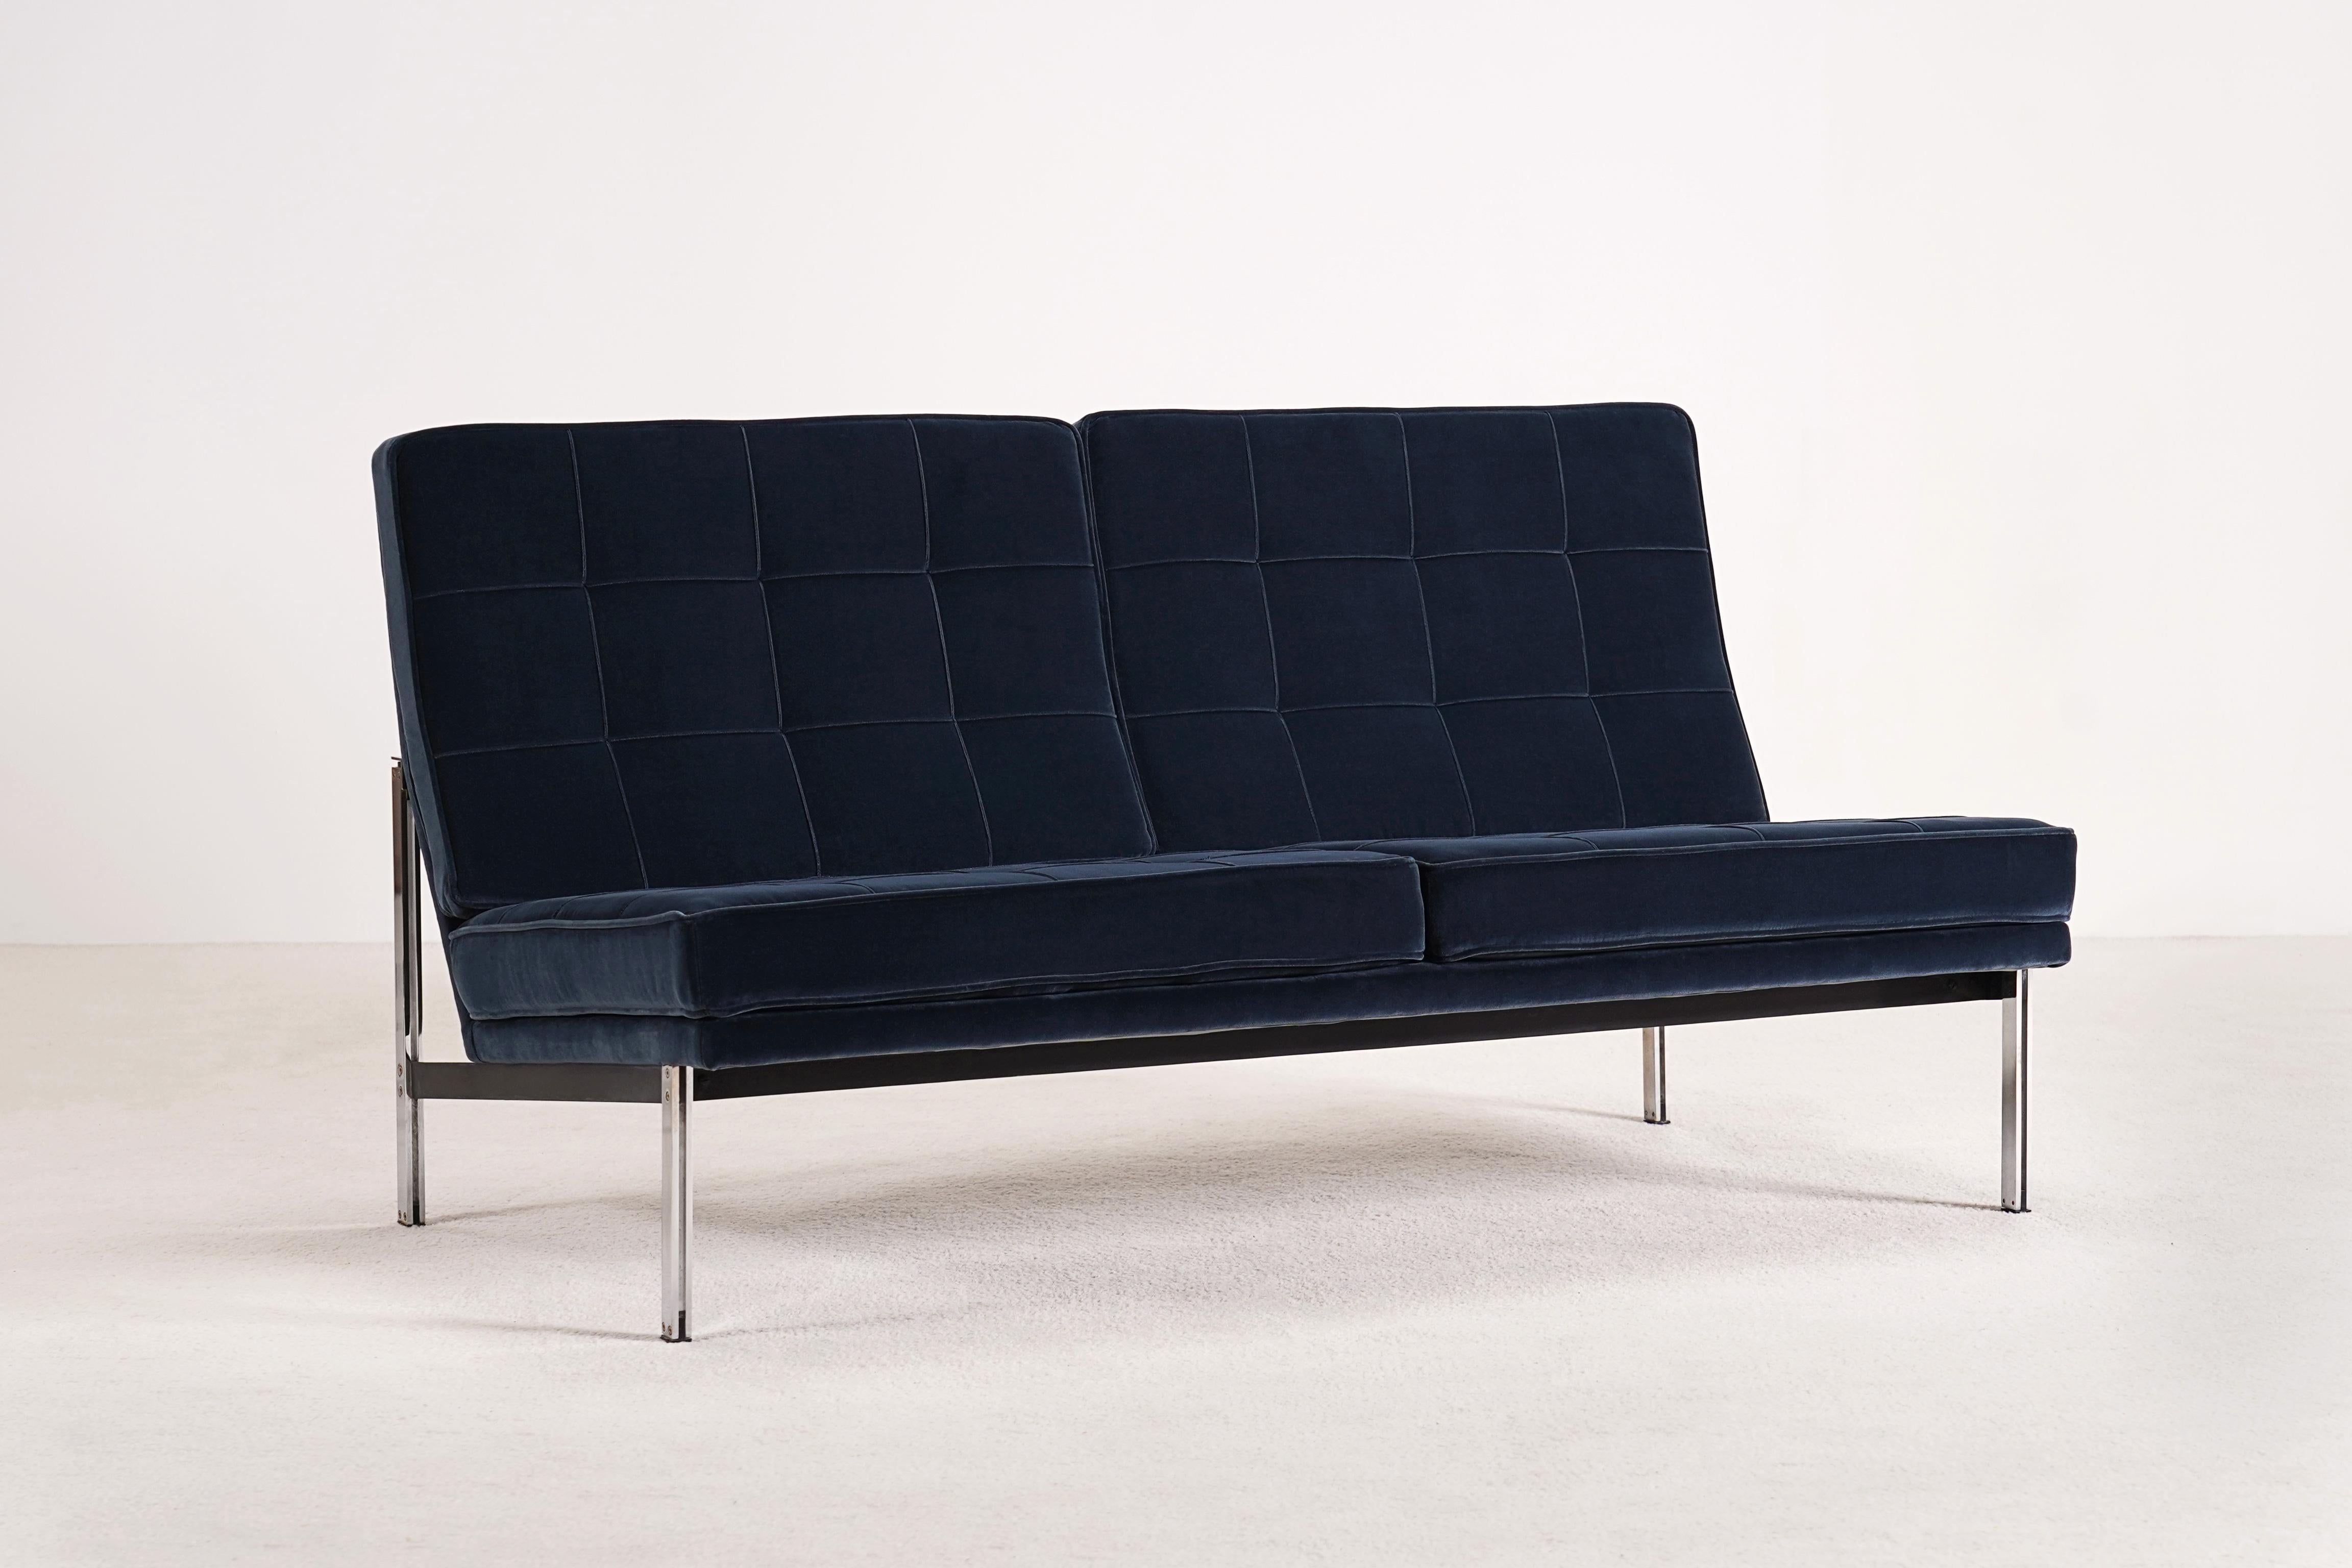 Lovely Two seat sofa model 52 also known as ‘Parallel Bar’ designed by Florence Knoll in 1954 and produced by Knoll International from 1955 to 1973 This sofa is an edition from the very early 60s.

Excellent condition.
Chromed steel base and black